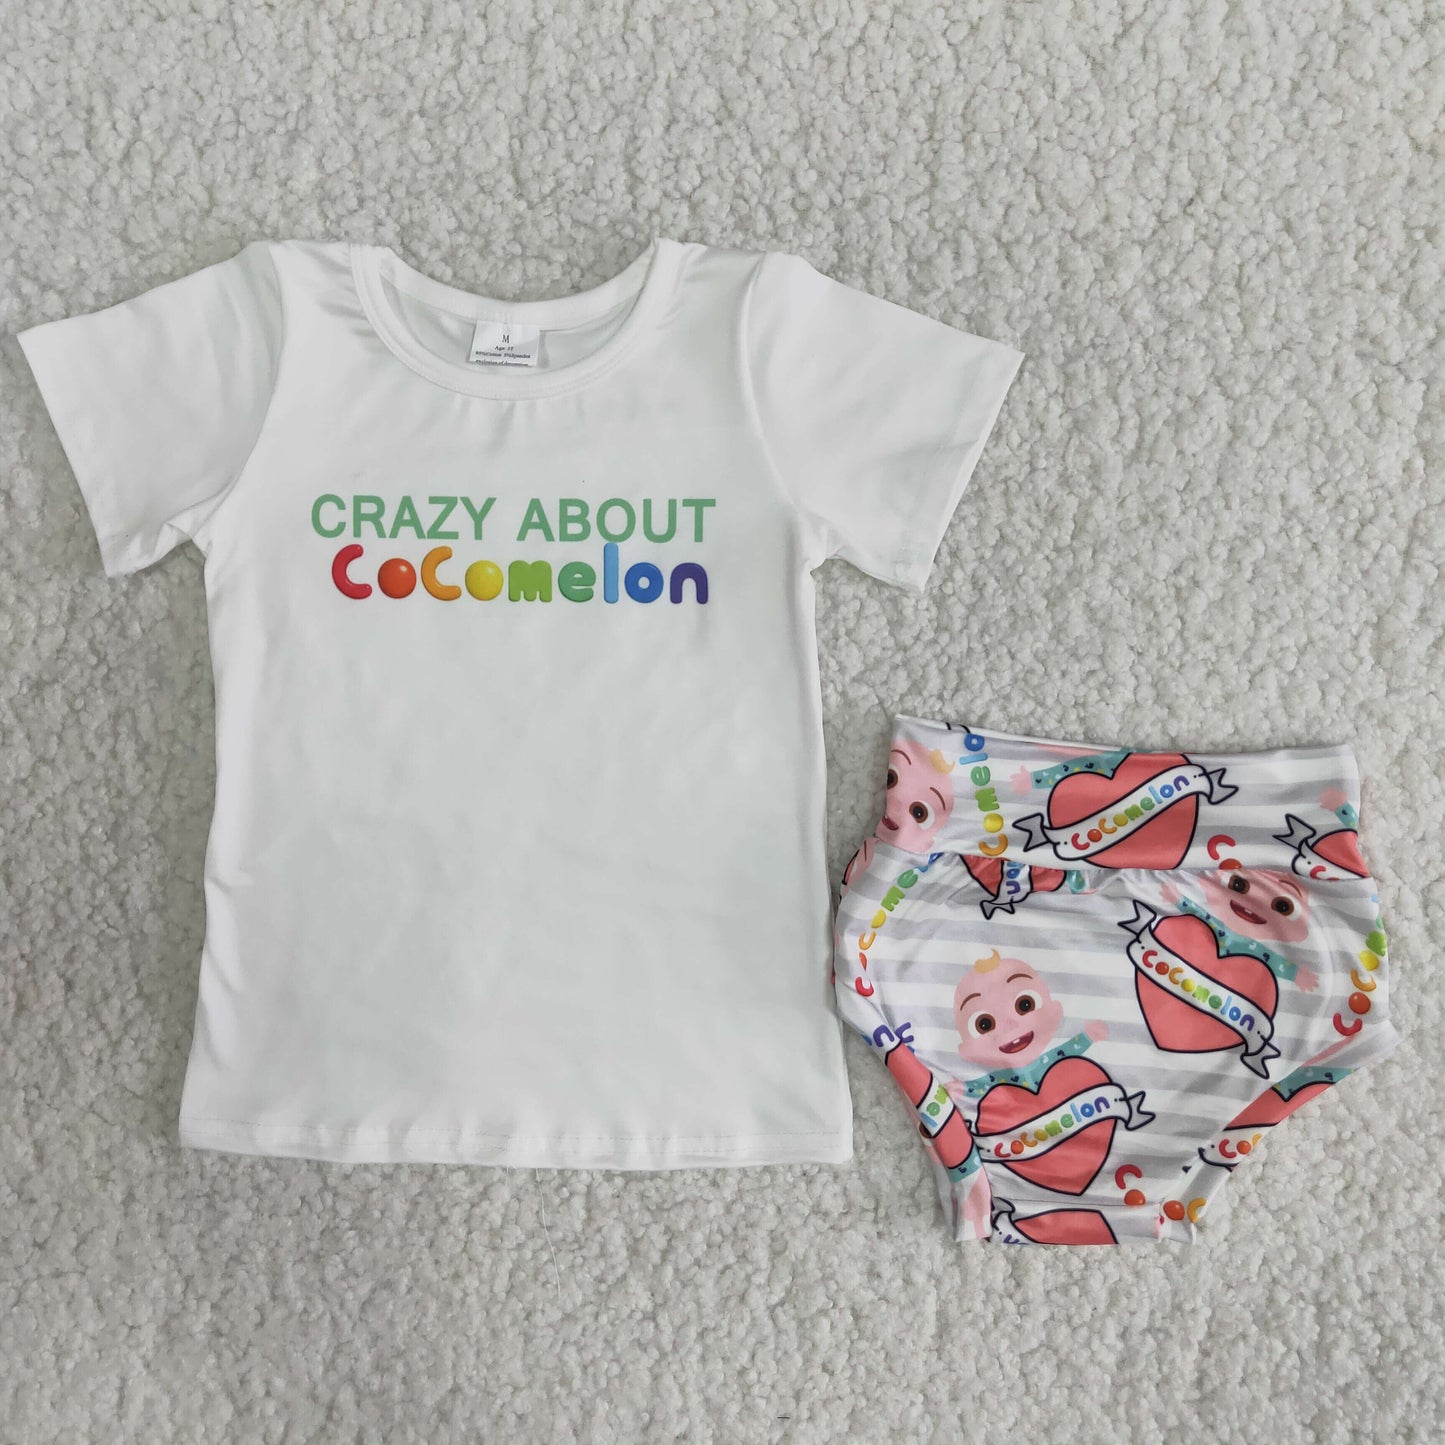 Letter white T-shirt love baby Size bummie set